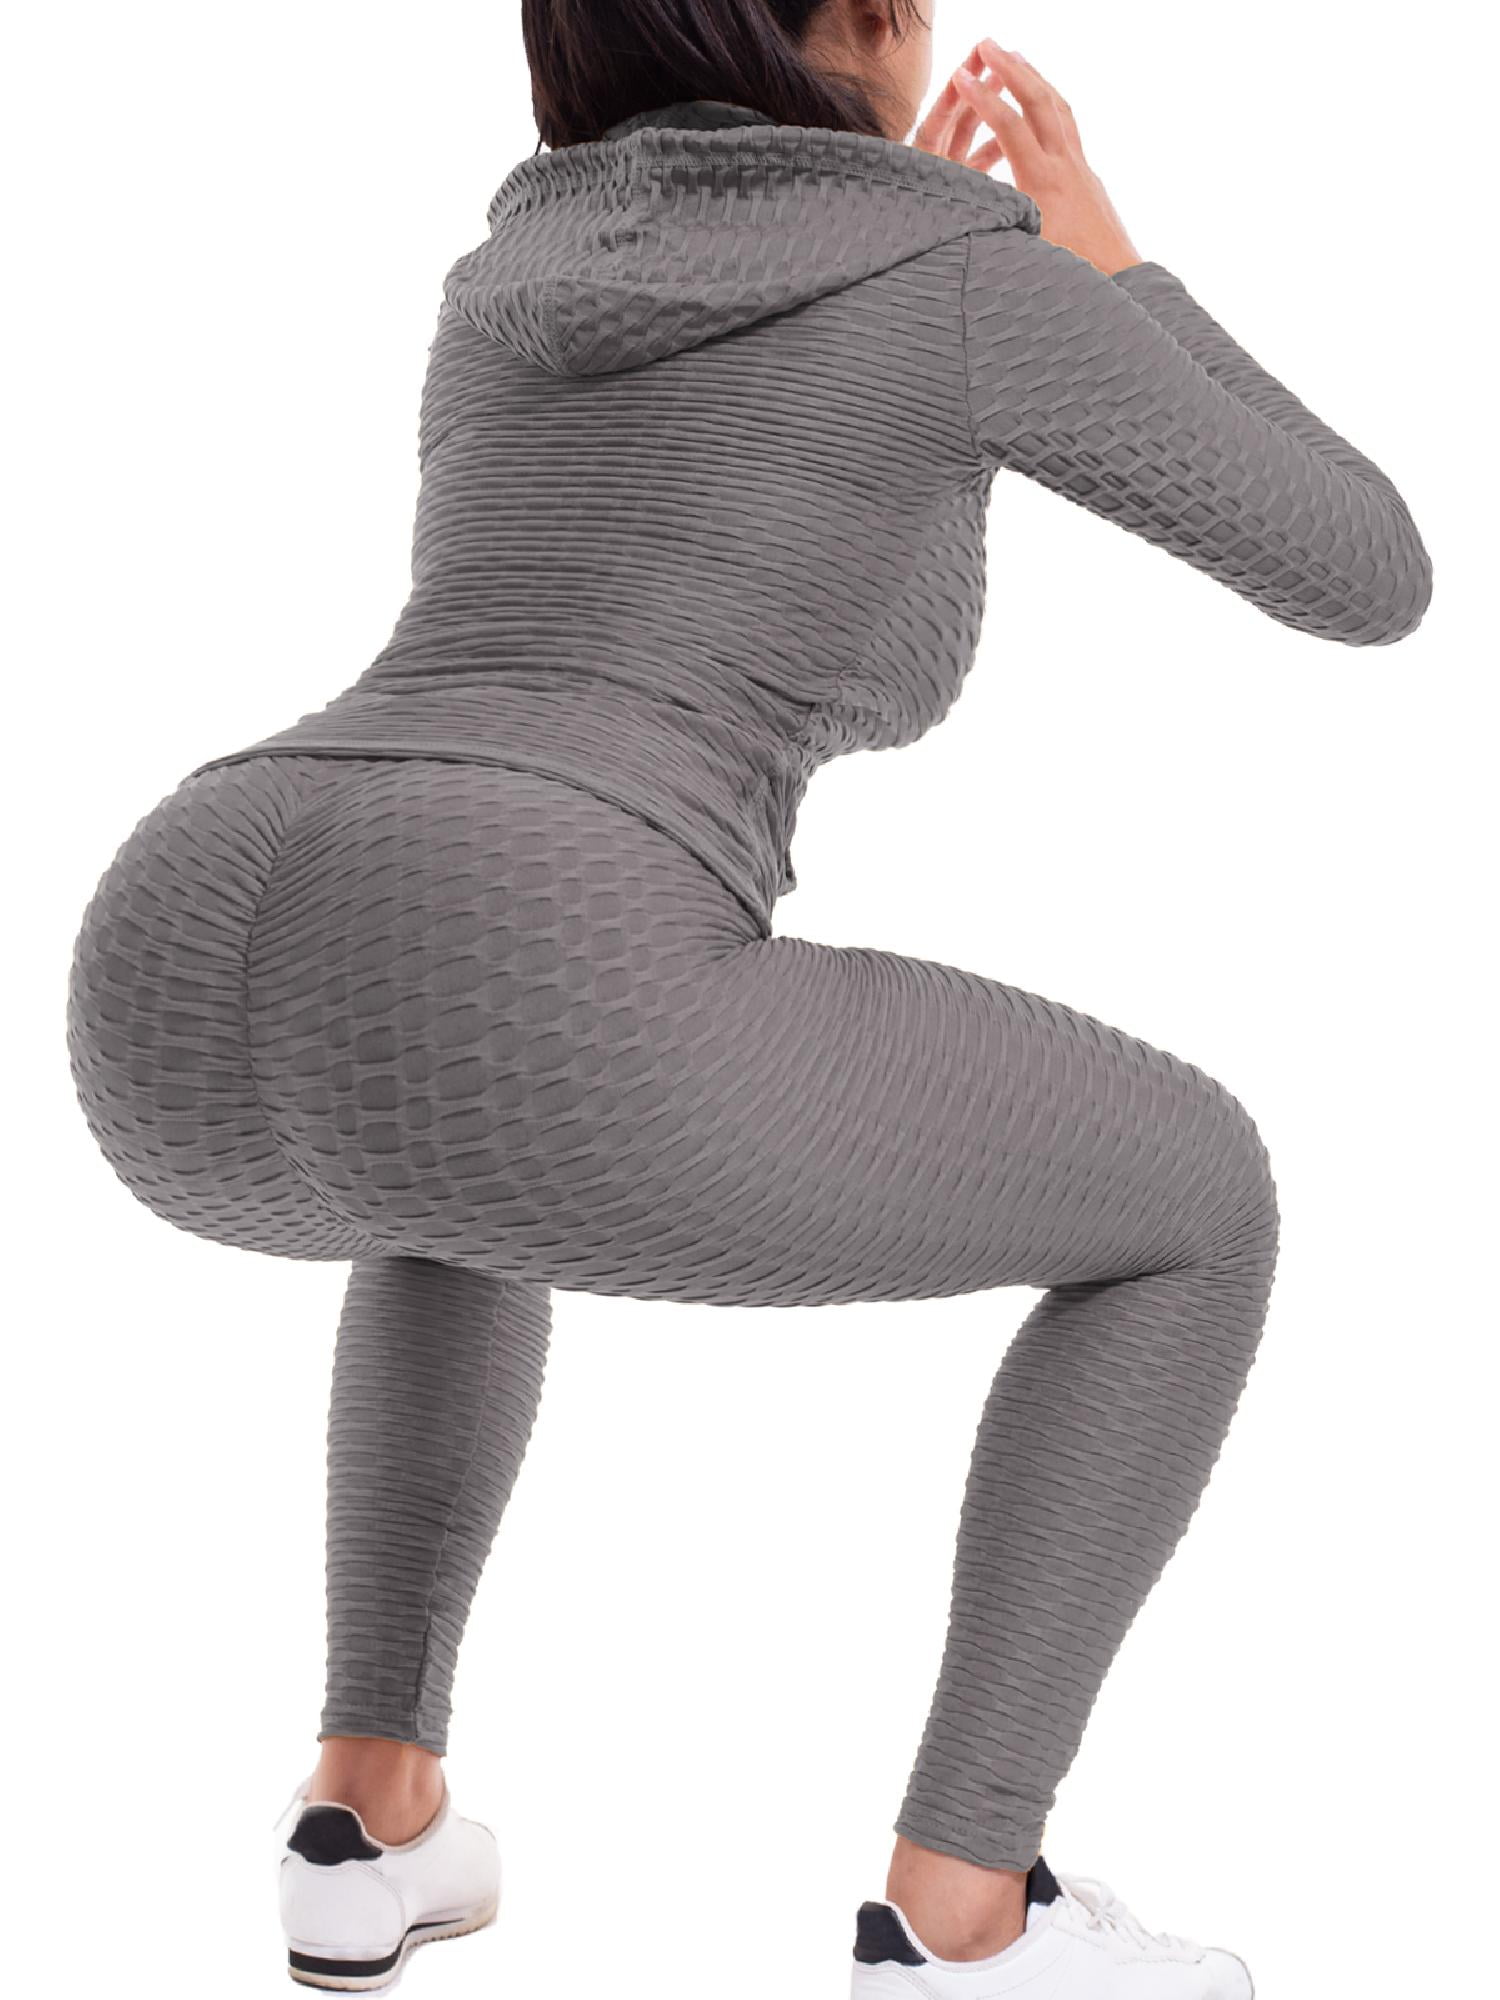 MixMatchy Solid Scrunch Butt Active Workout Yoga Leggings & Zip Up